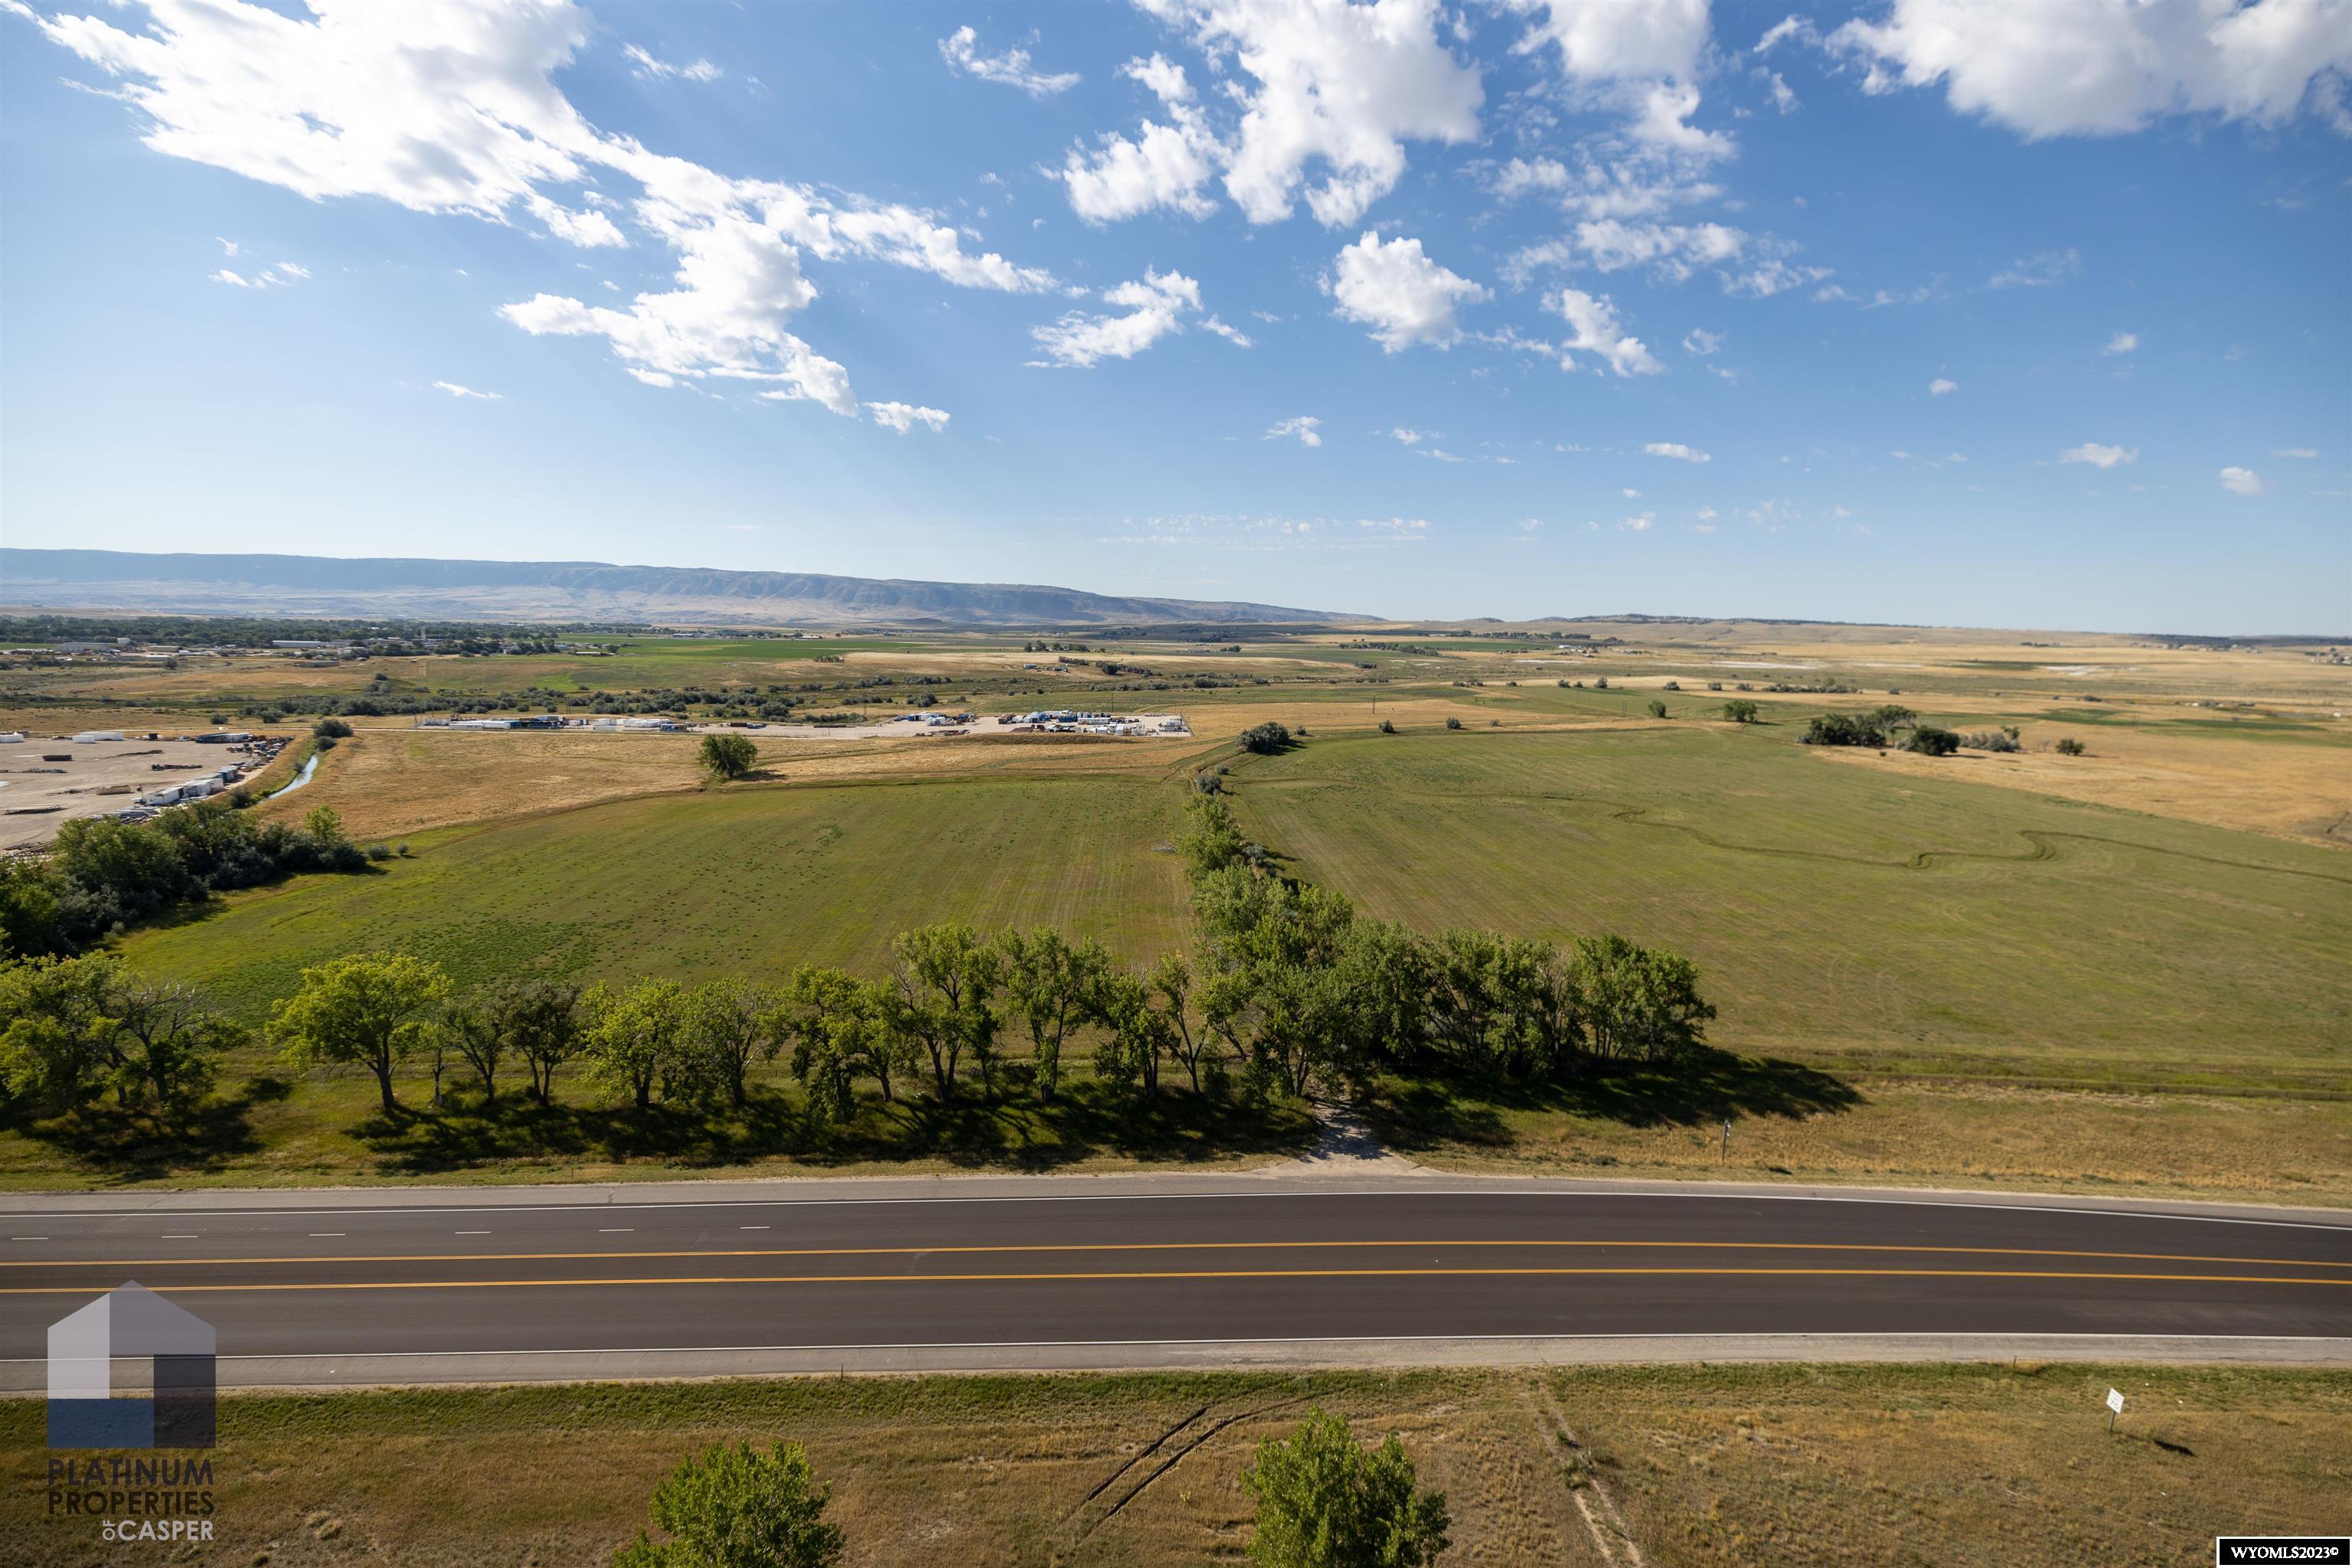 Excellent location with easy access to Highway 20/26 , 4 miles to I-25, right across from Casper International Airport which also has the foreign trade zone and only 8 minutes from downtown Casper. This high traffic location with 280 acres offers endless opportunities with it being zoned light industrial. Electricity is onsite with other utilities running nearby, 400 acre ft of annual water rights. Pre development engineering work has been completed. For more information on this property call Amy Dykes with Platinum Properties of Casper 307-258-8766 or Shae Cady Kimble.